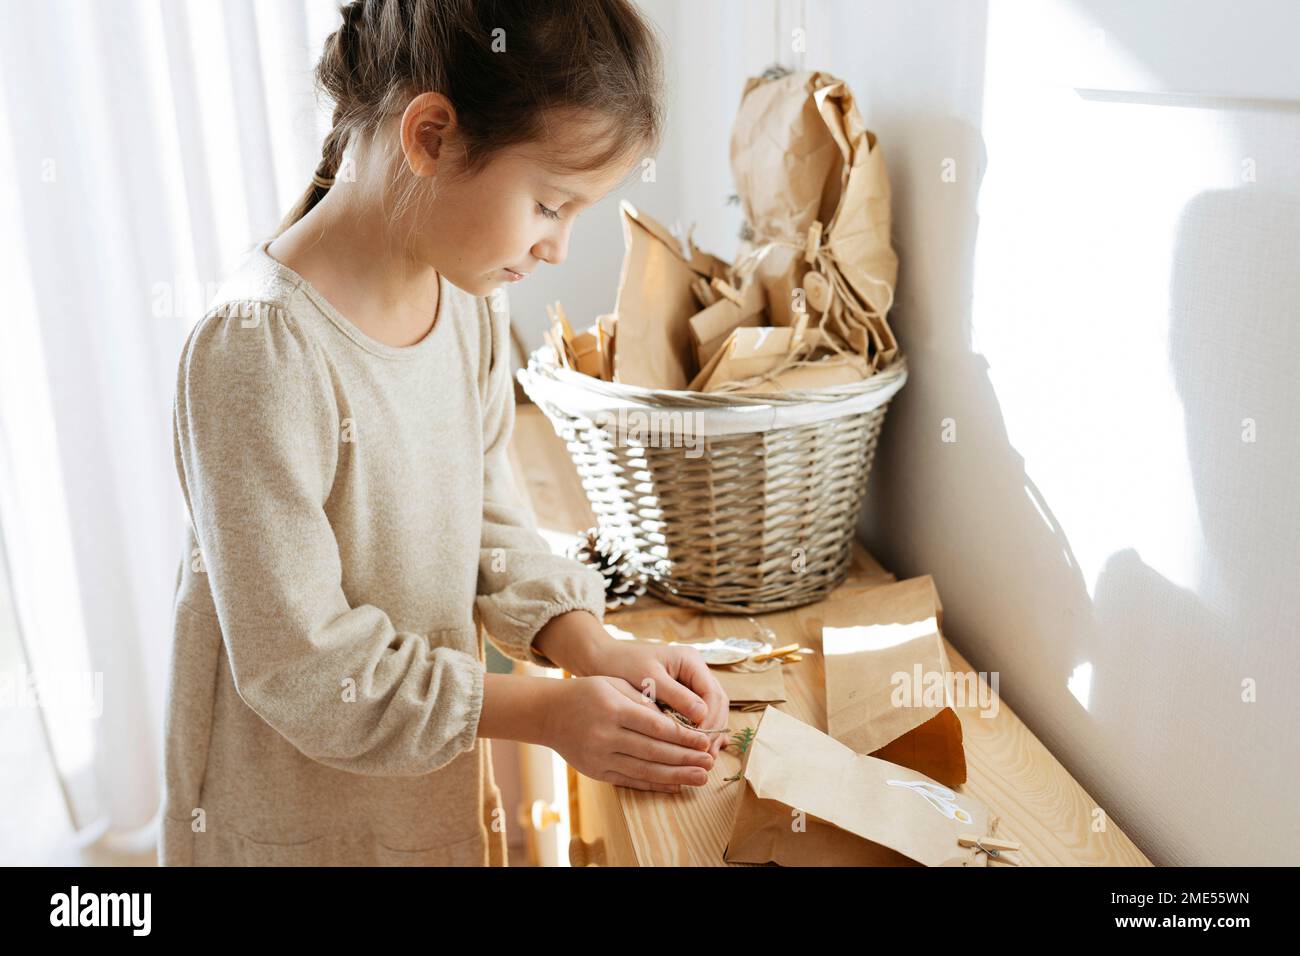 Cute girl opening gifts on cabinet at home Stock Photo